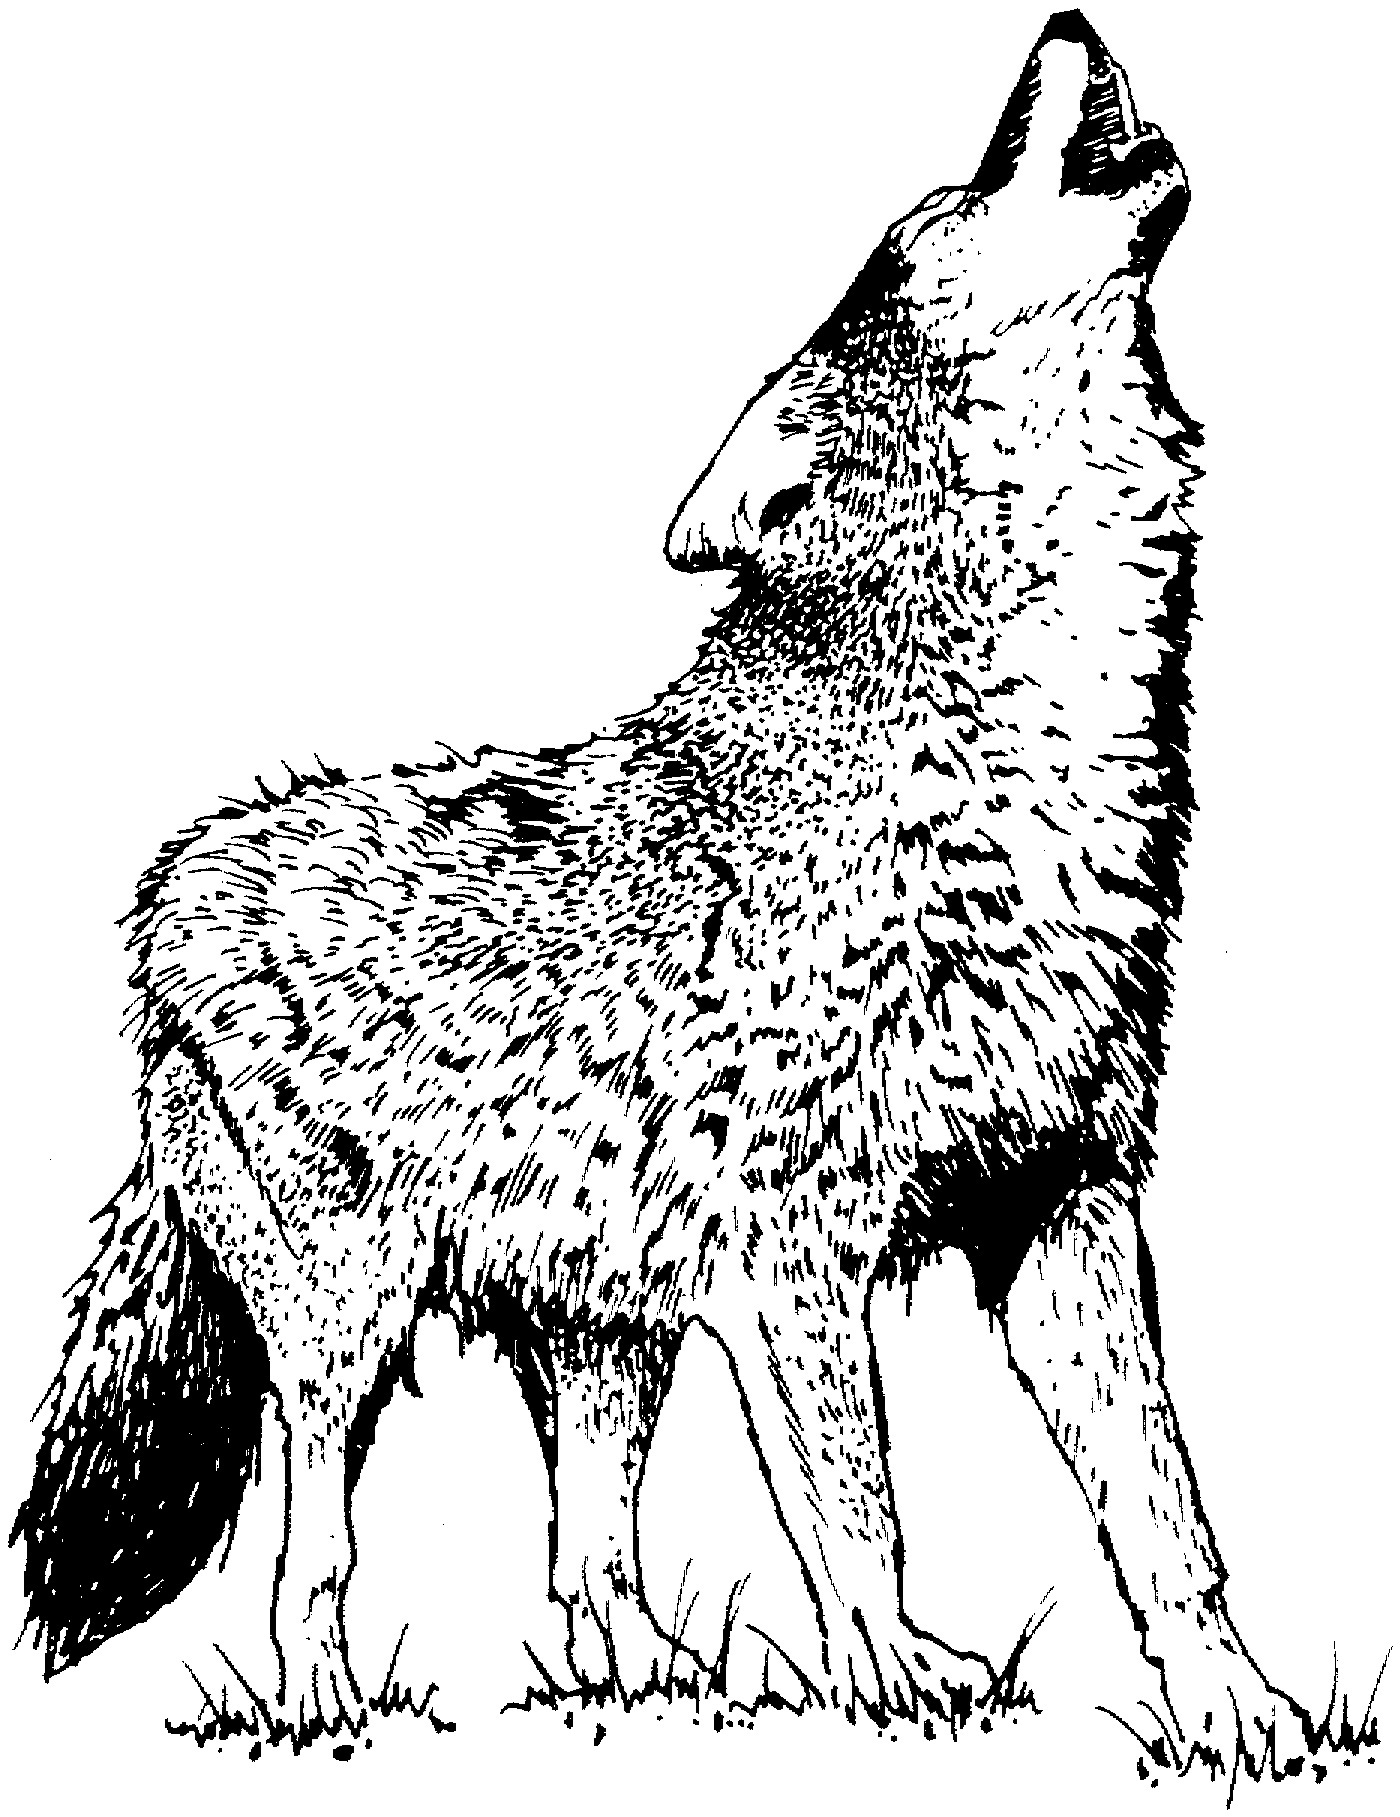 100 wolf coloring pages